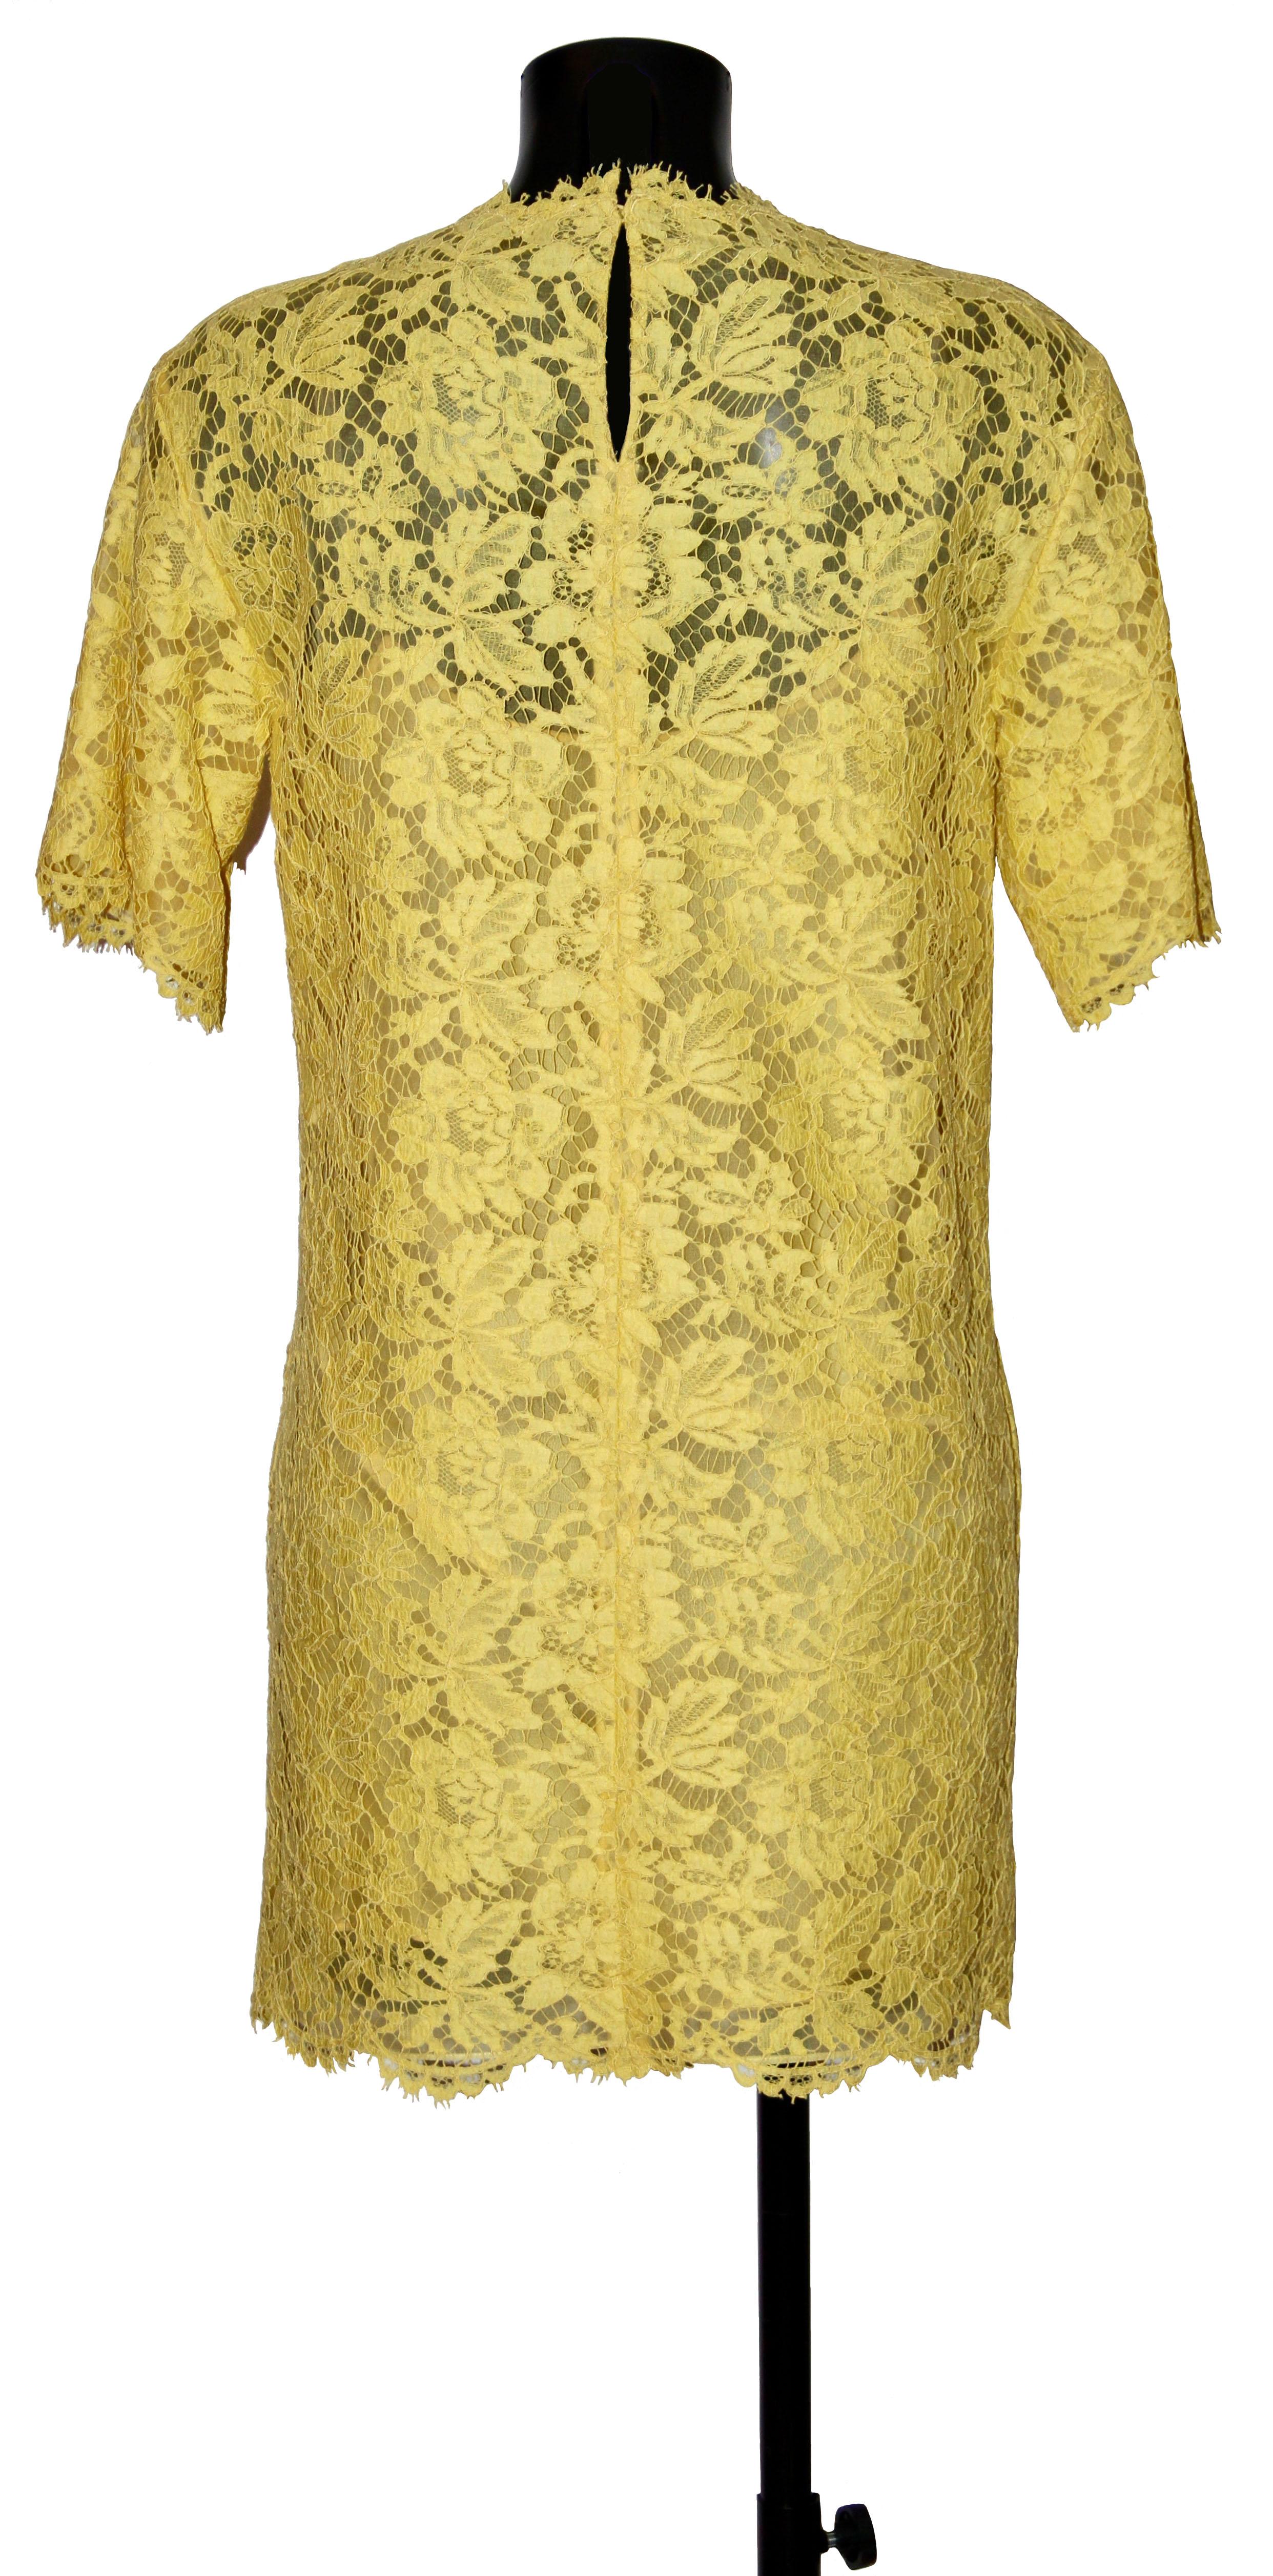 This pre-owned but new floral pattern lace dress from Valentino is a classic to be worn day or night. 

Fabric: Outer fabric: 77% cotton, 17% rayon, 6% polyamide - Inner fabric: 100% silk
Lining: 91% silk, 9% elastane
Color: yellow
Size: